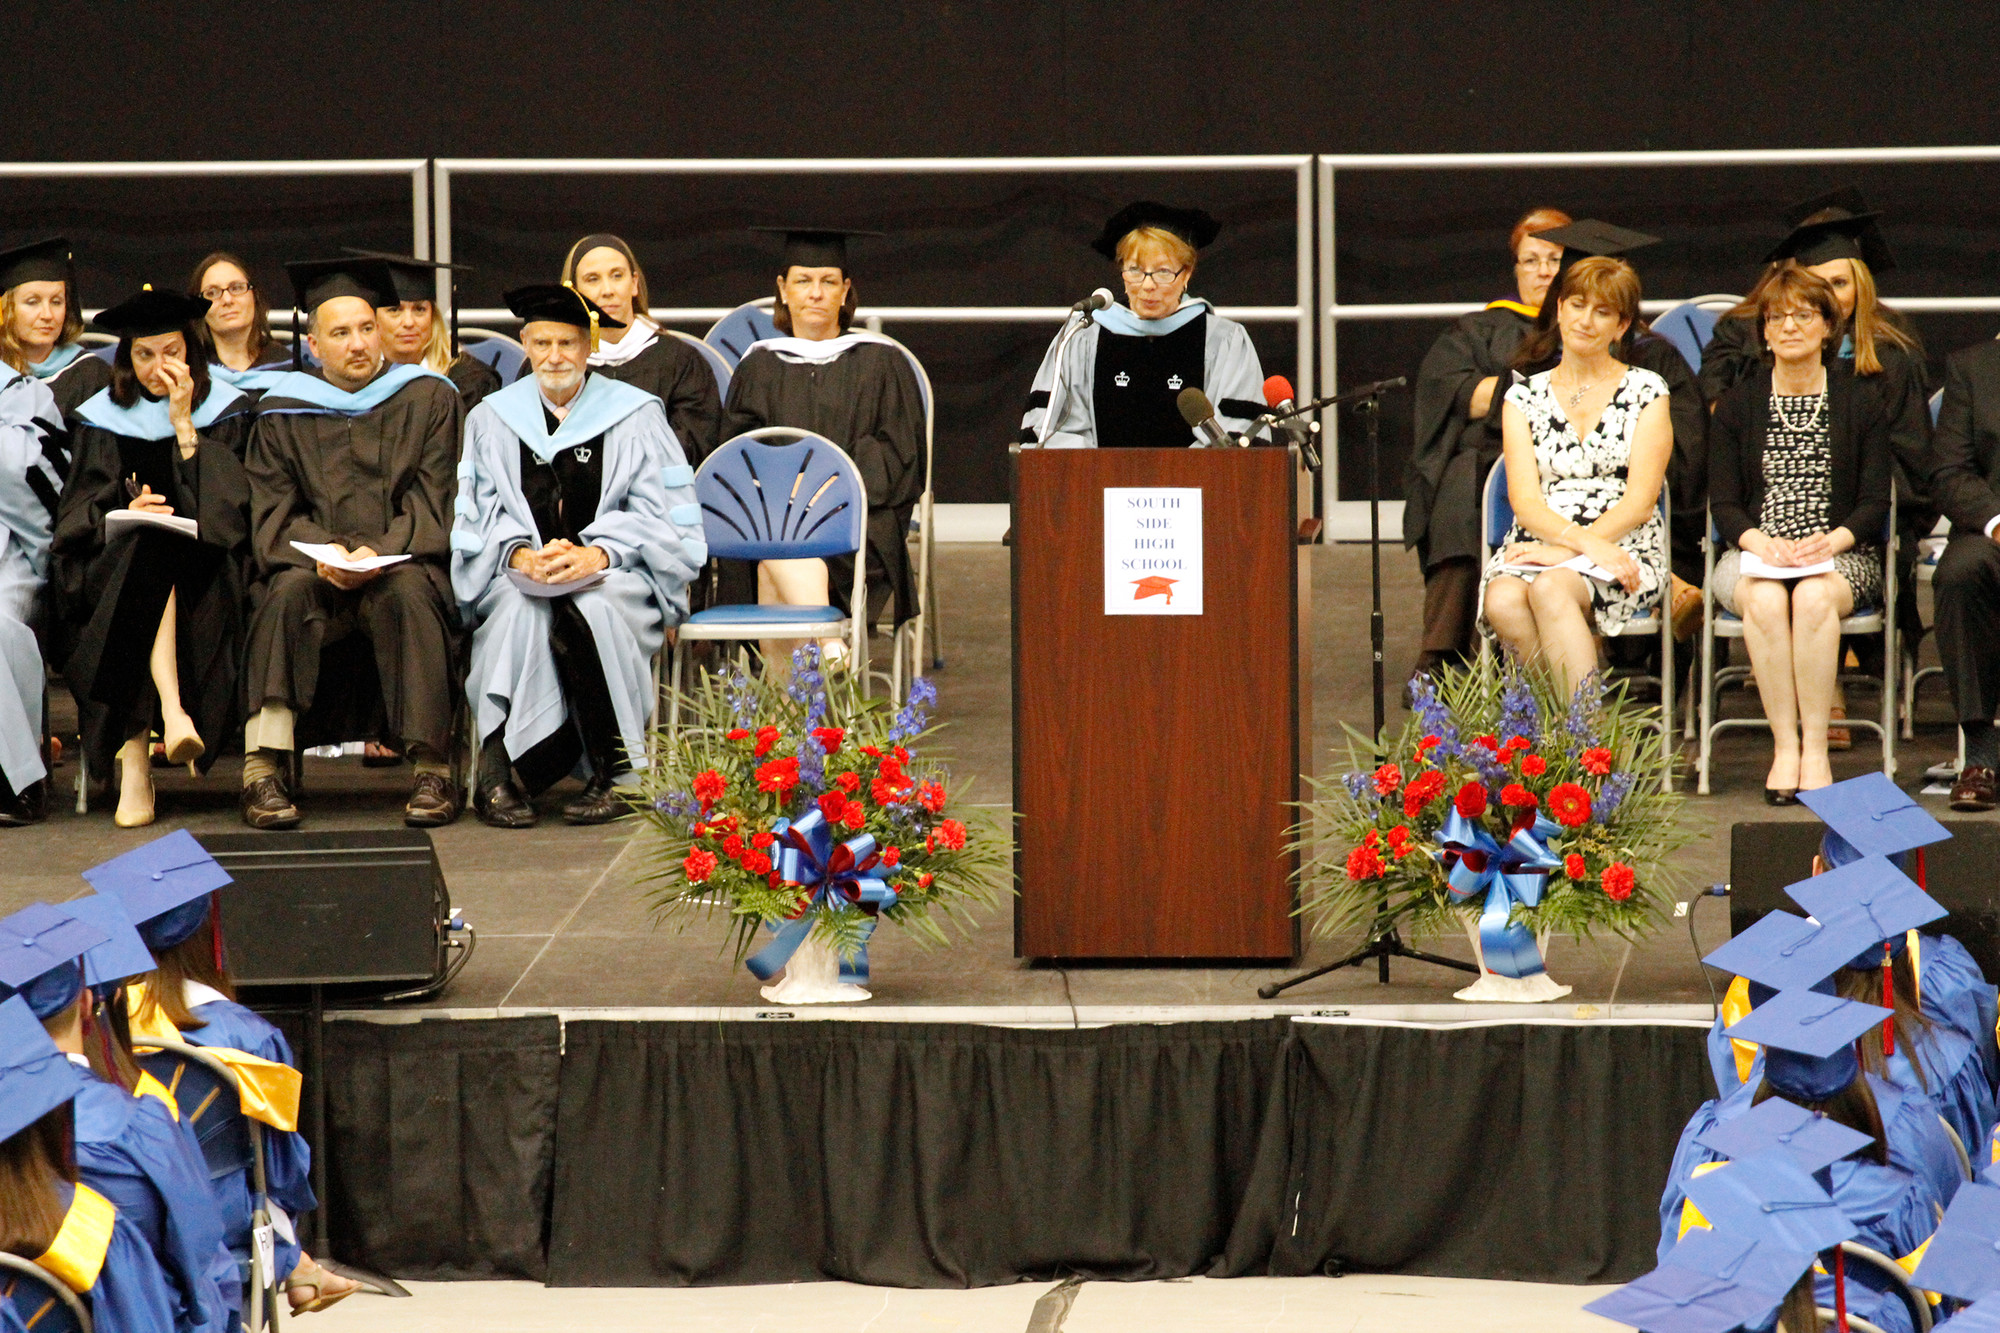 Outgoing principal Dr. Carol Burris spoke to the graduates at her last commencement ceremony.